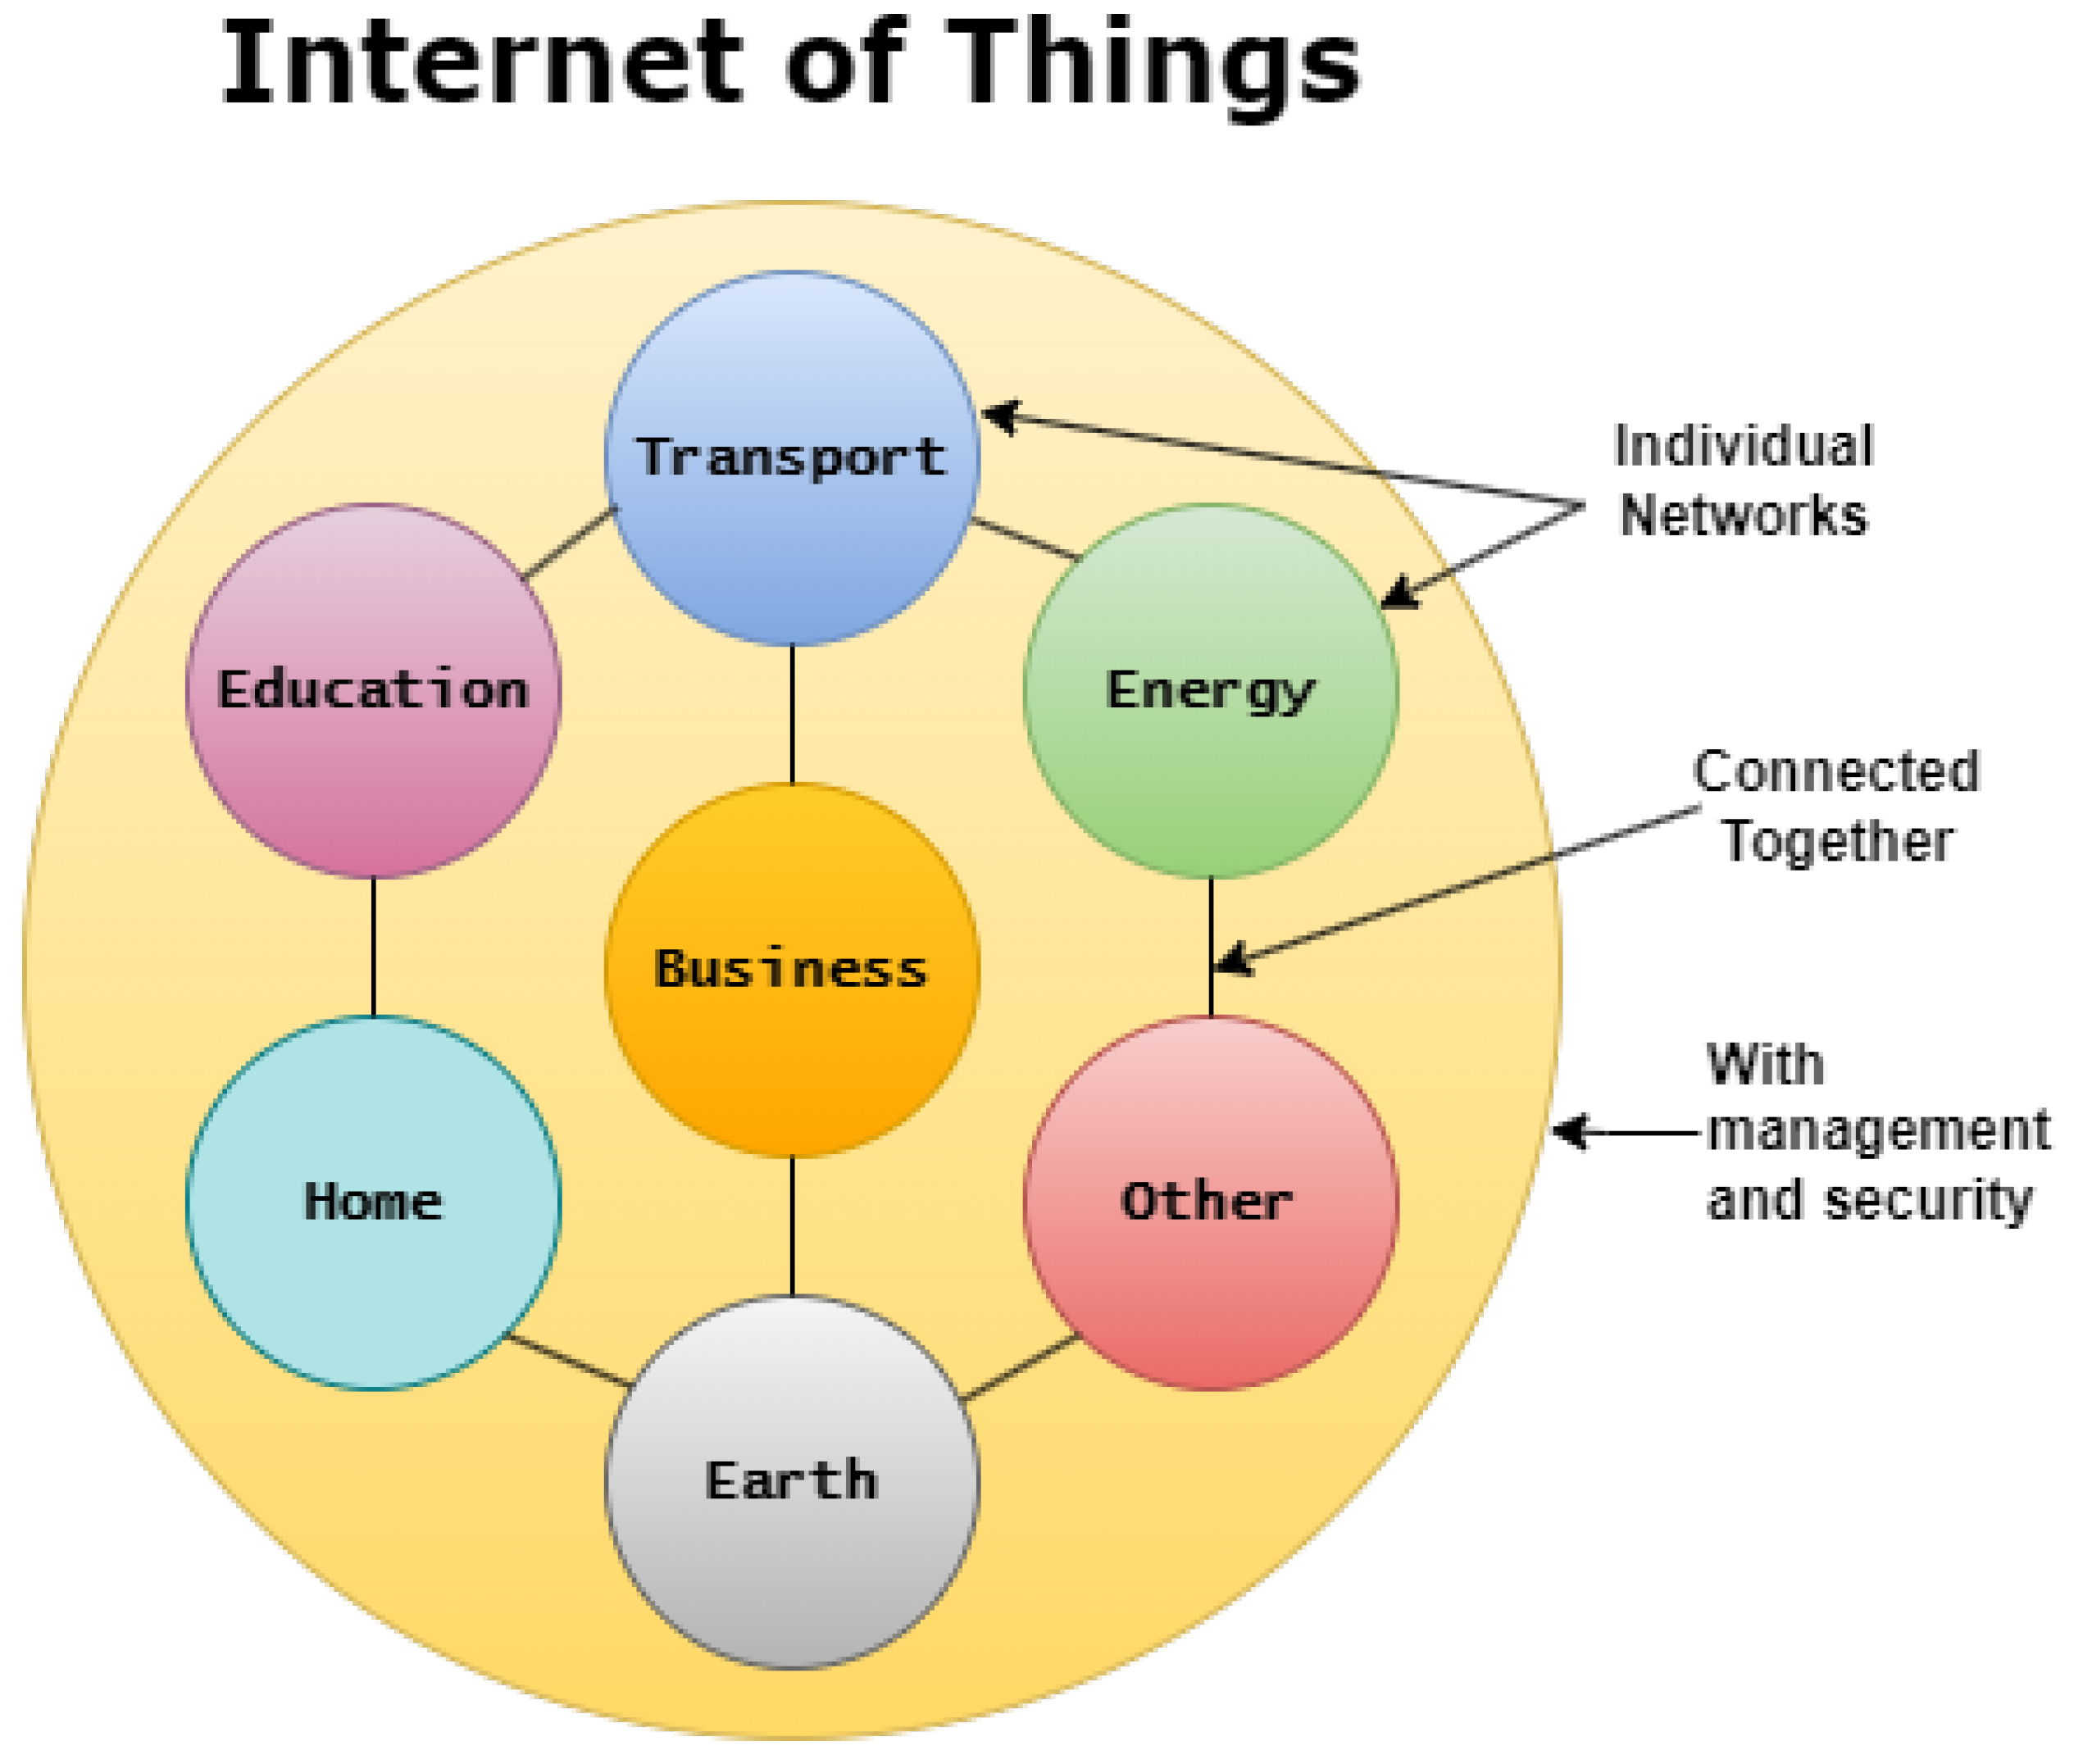 Realizing a Smart Life: Changing Lives with IoT Home Appliances